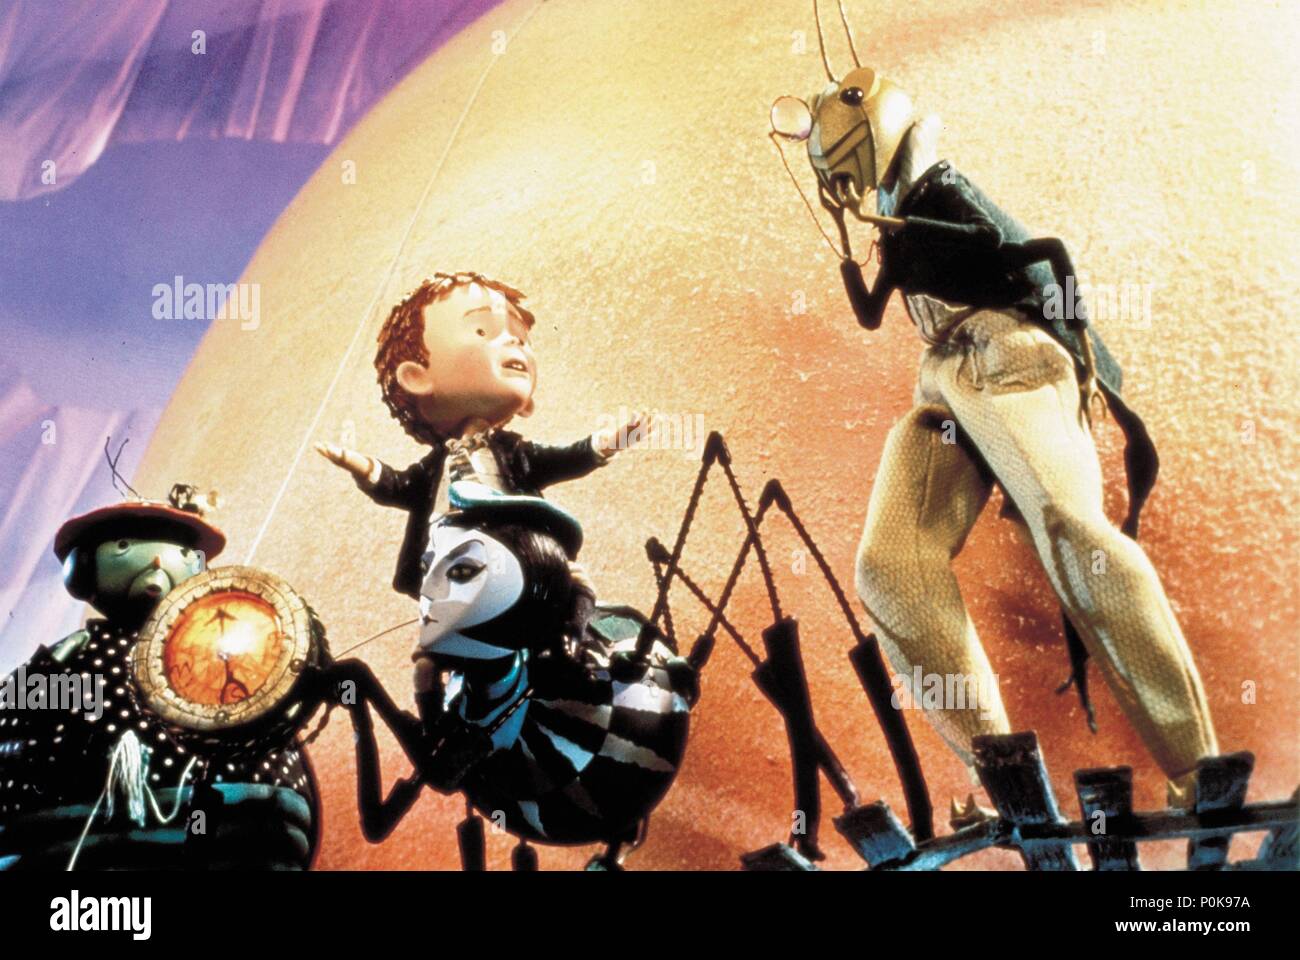 Original Film Title James And The Giant Peach English Title James And The Giant Peach Film 2013